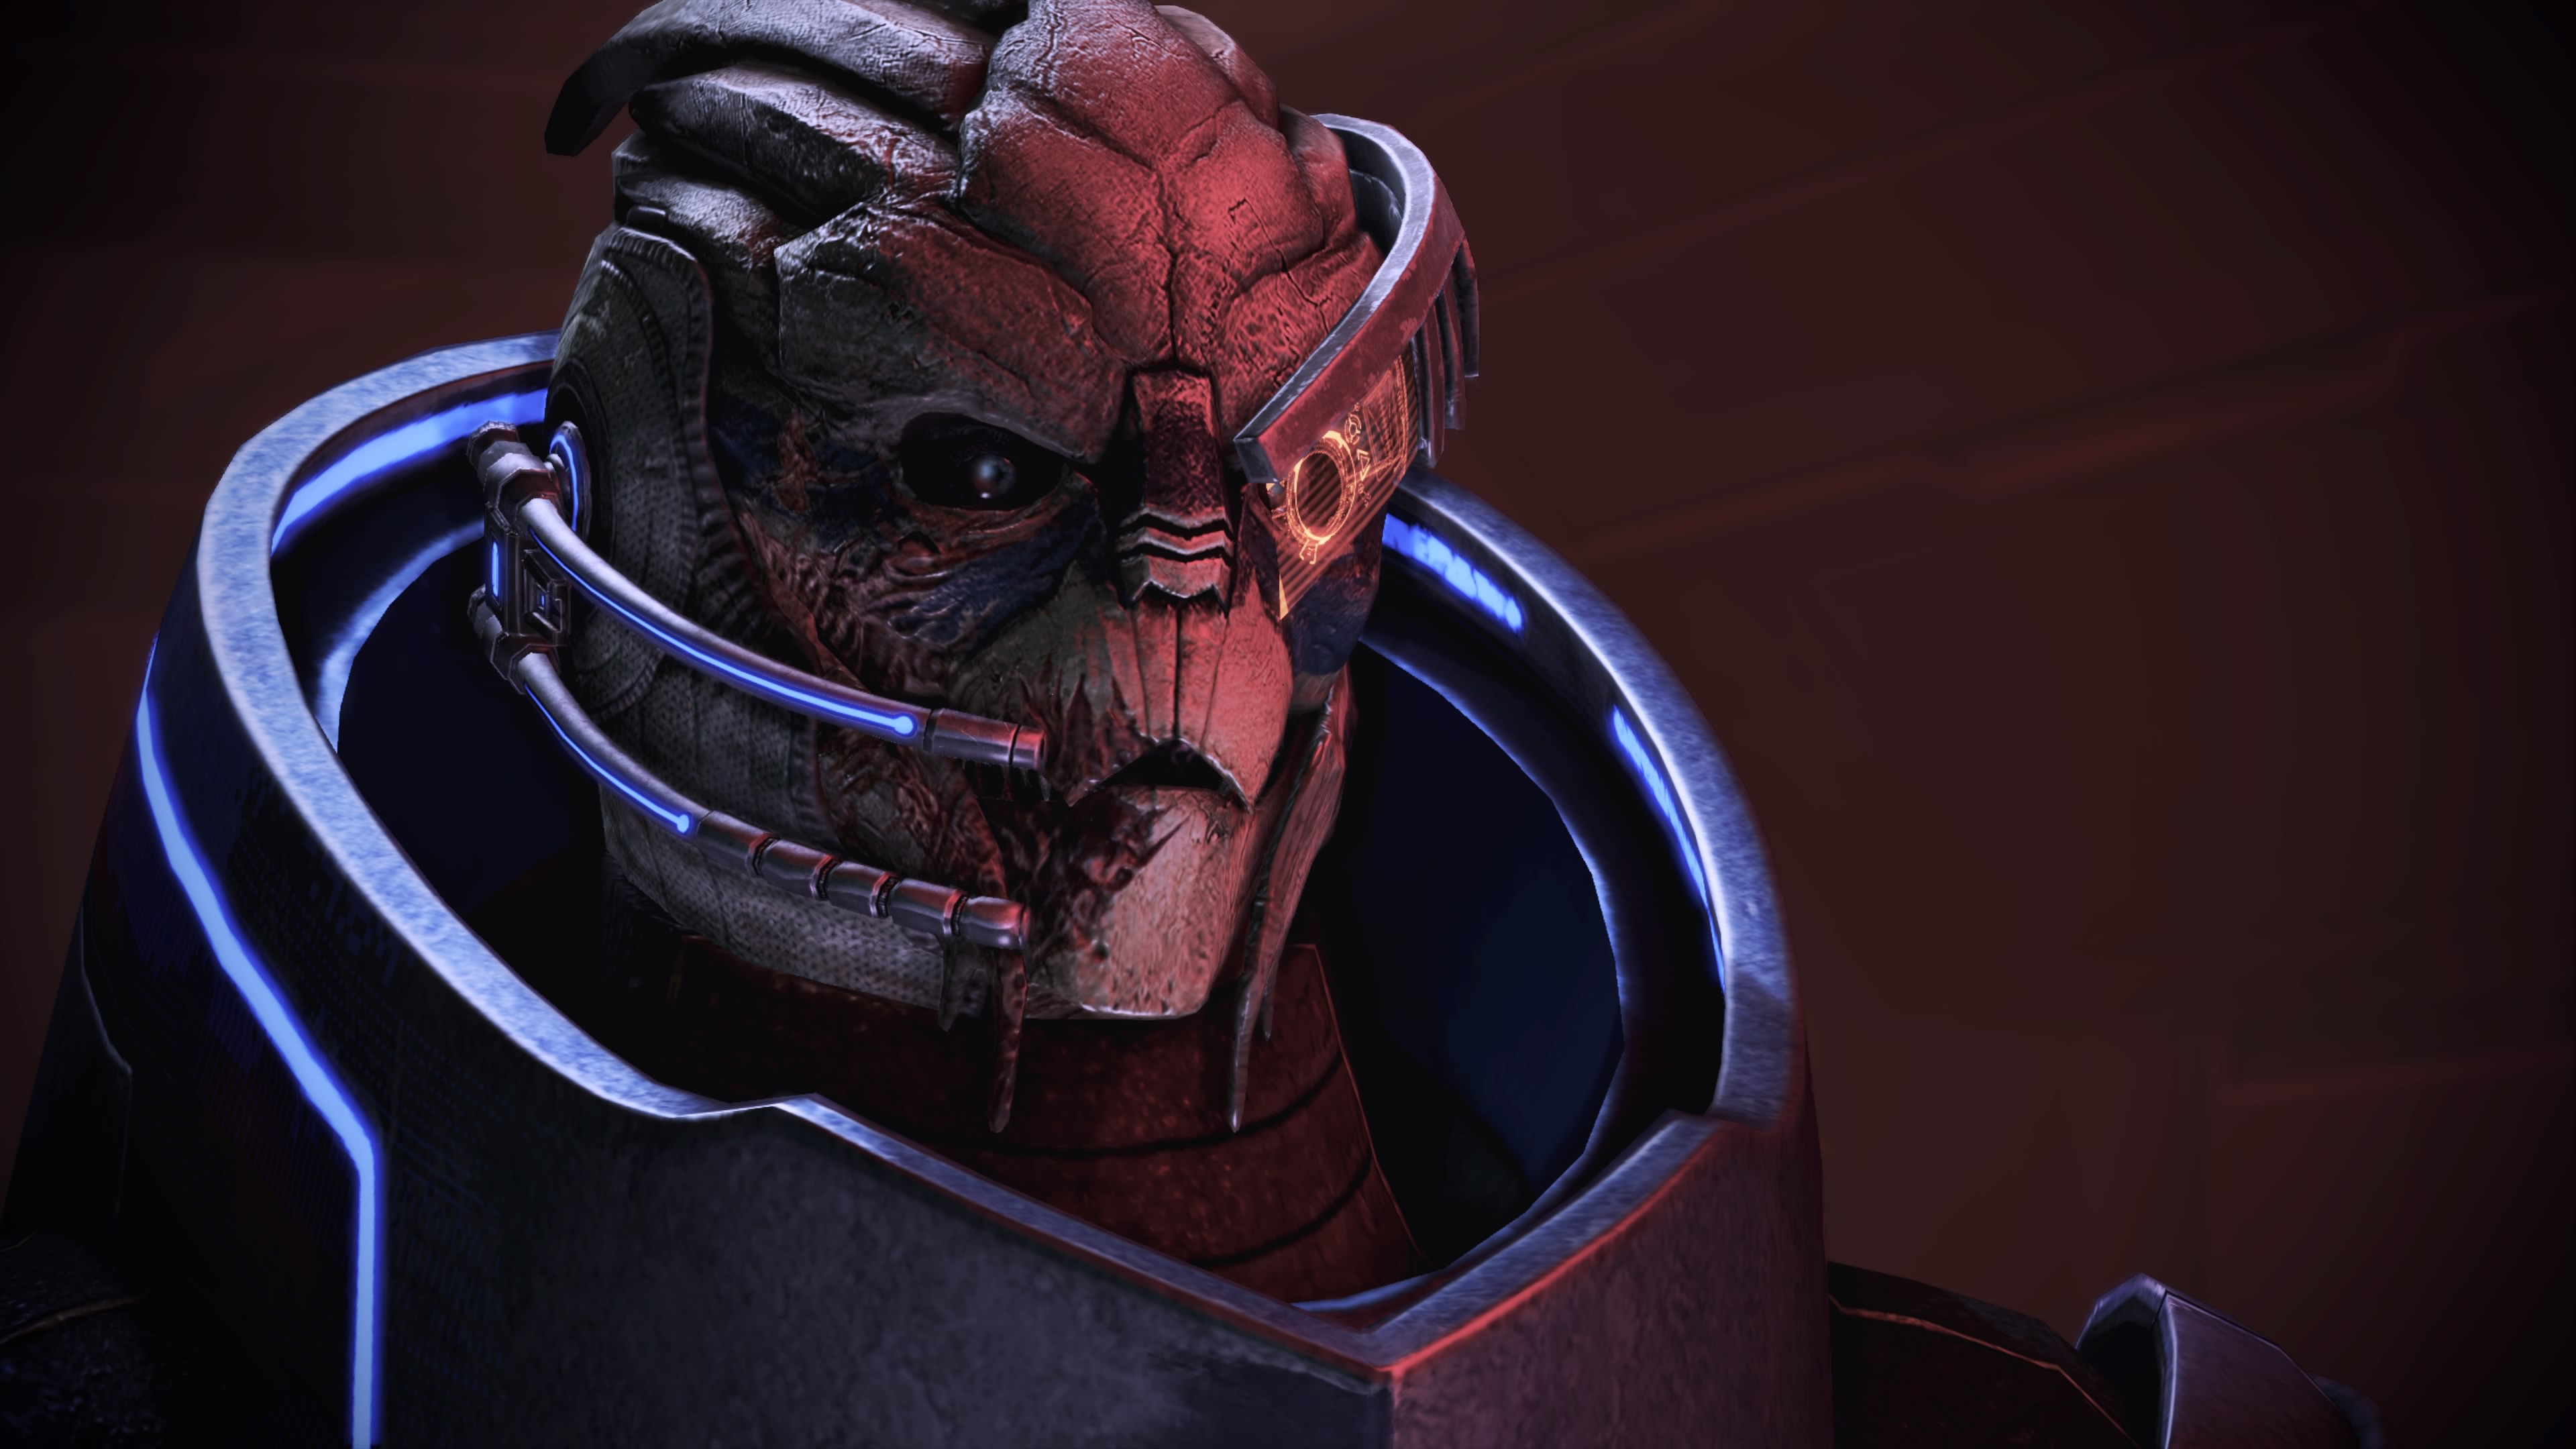 The Turian citadel security officer turned vigilante (and best boy) Garrus